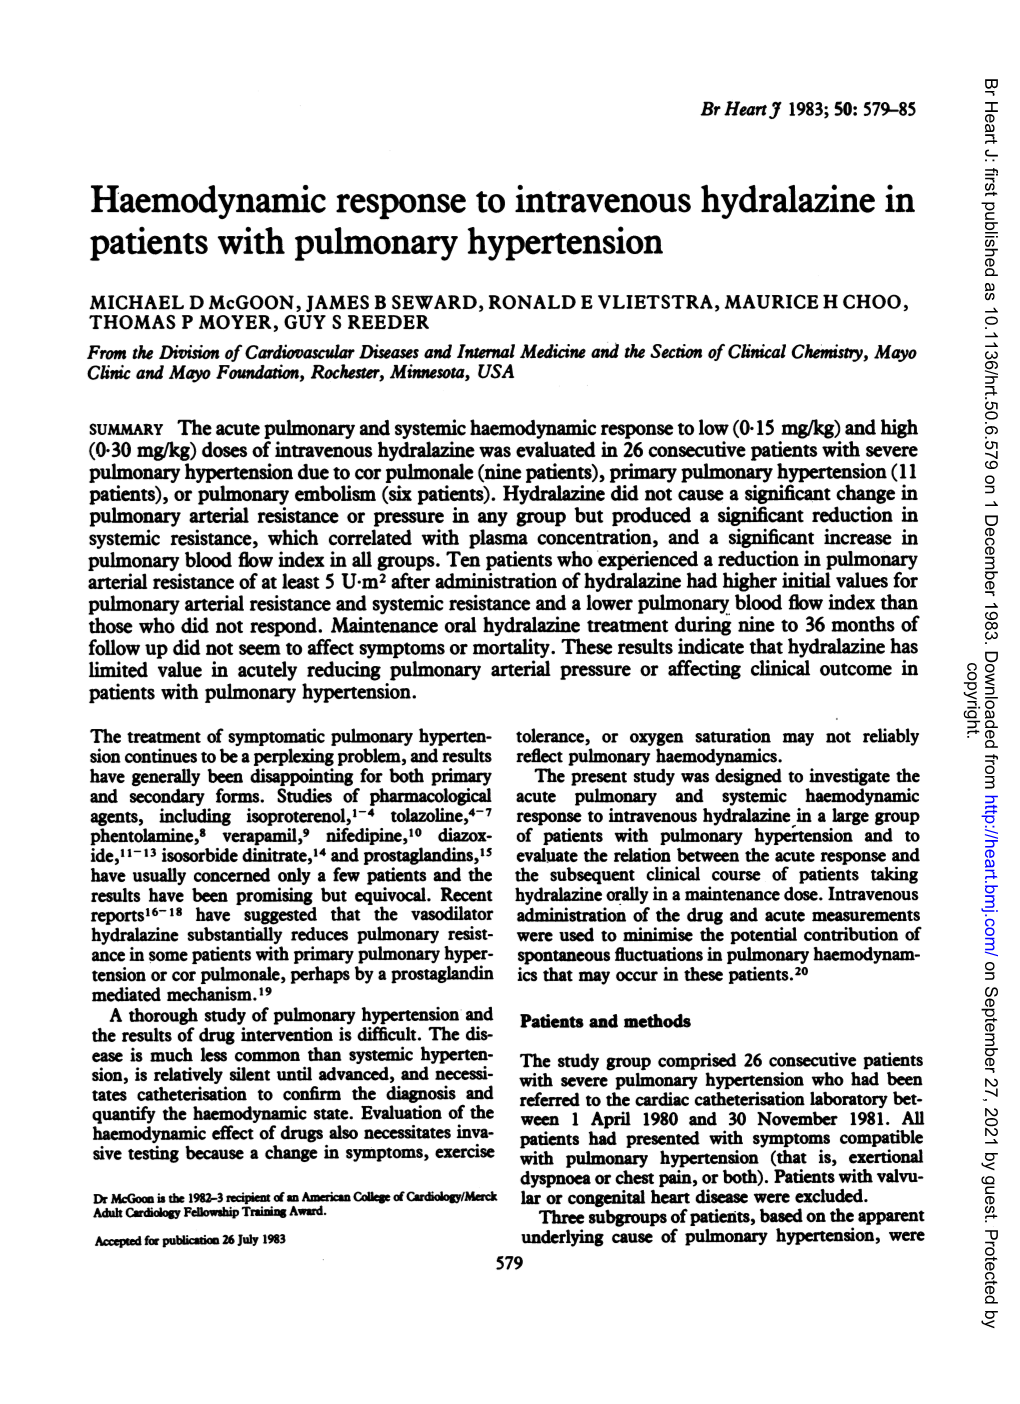 Haemodynamic Response to Intravenous Hydralazine in Patients with Pulmonary Hypertension